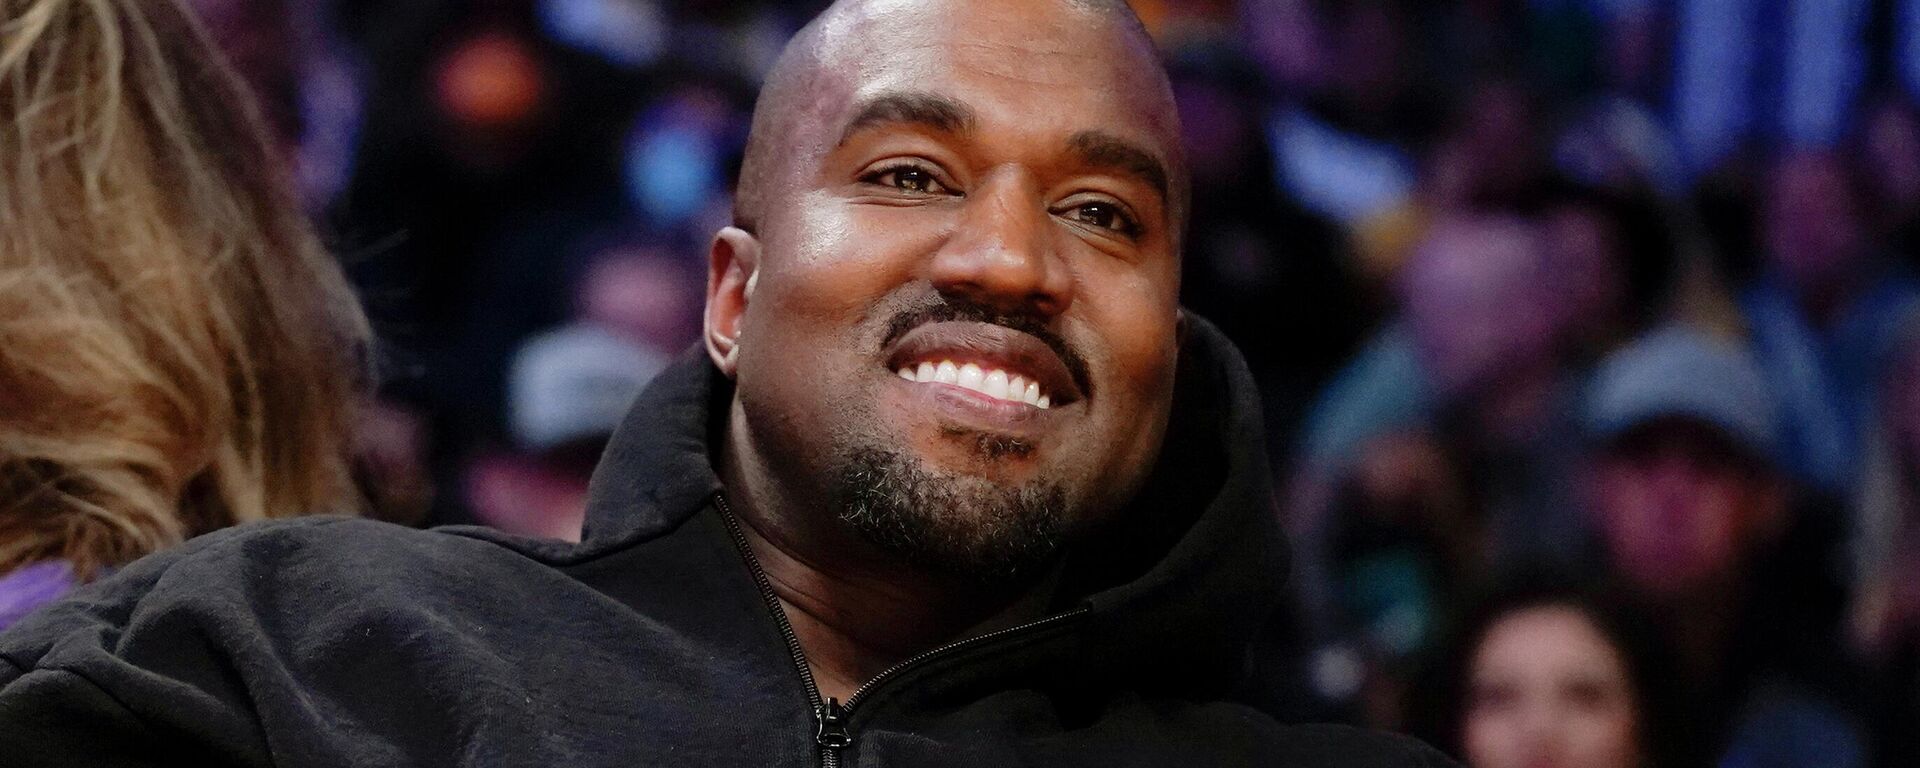 Kanye West watches the first half of an NBA basketball game between the Washington Wizards and the Los Angeles Lakers in Los Angeles on March 11, 2022. A completed documentary about the rapper formerly known as Kanye West has been shelved amid his recent slew of antisemitic remark - Sputnik International, 1920, 09.12.2022